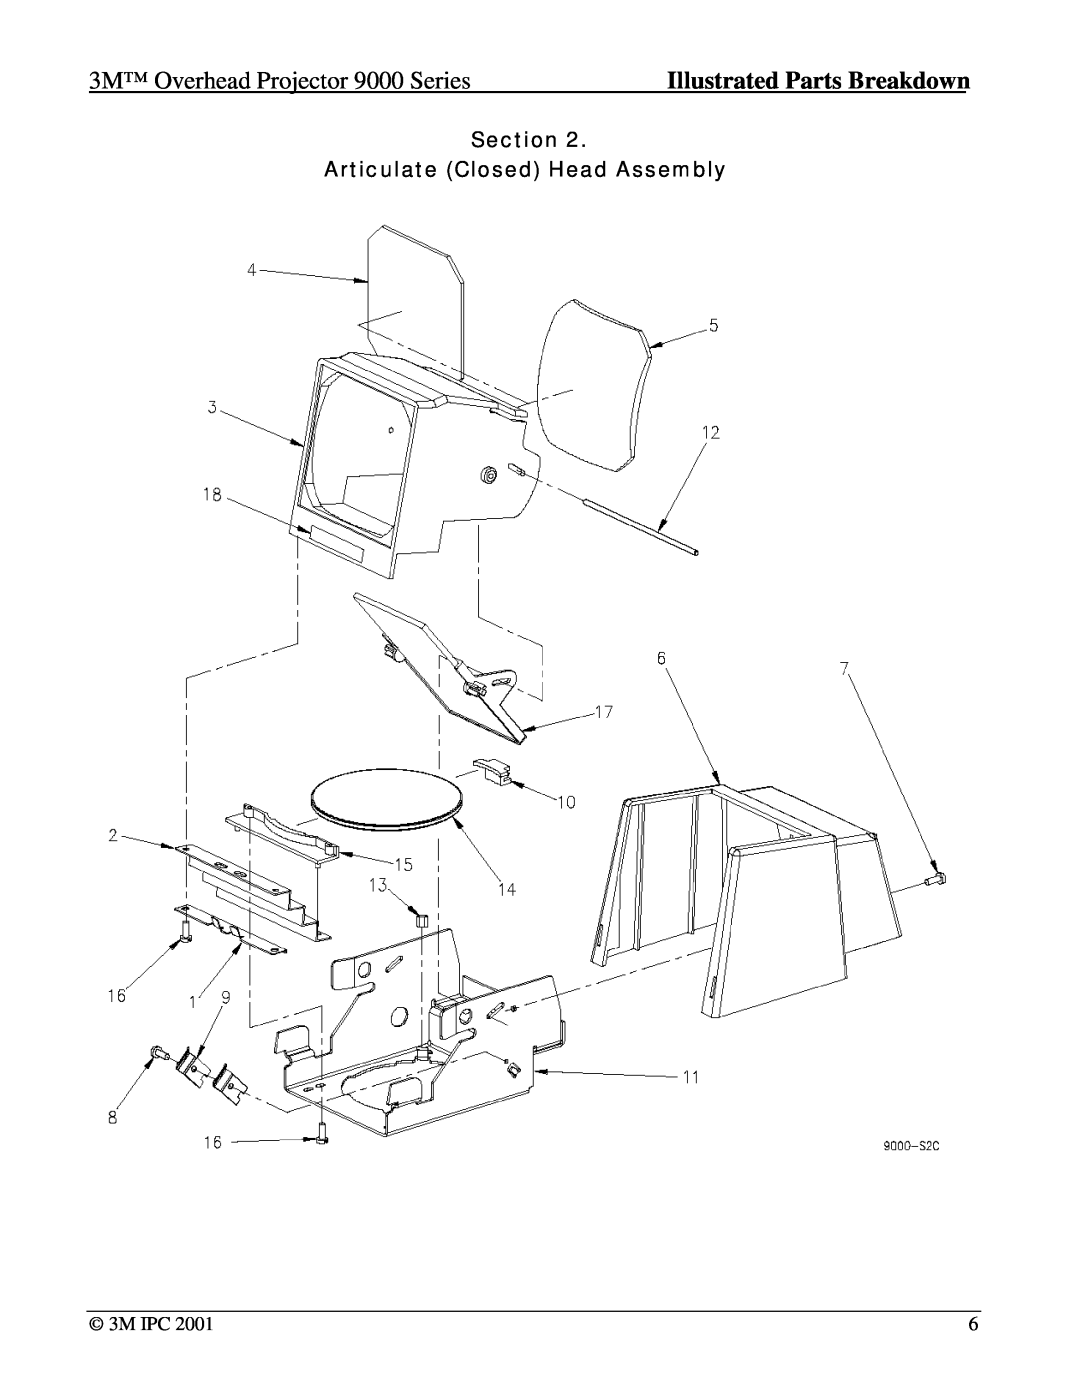 Xerox 9200 Section Articulate Closed Head Assembly, 3M Overhead Projector 9000 Series, Illustrated Parts Breakdown, 3M IPC 